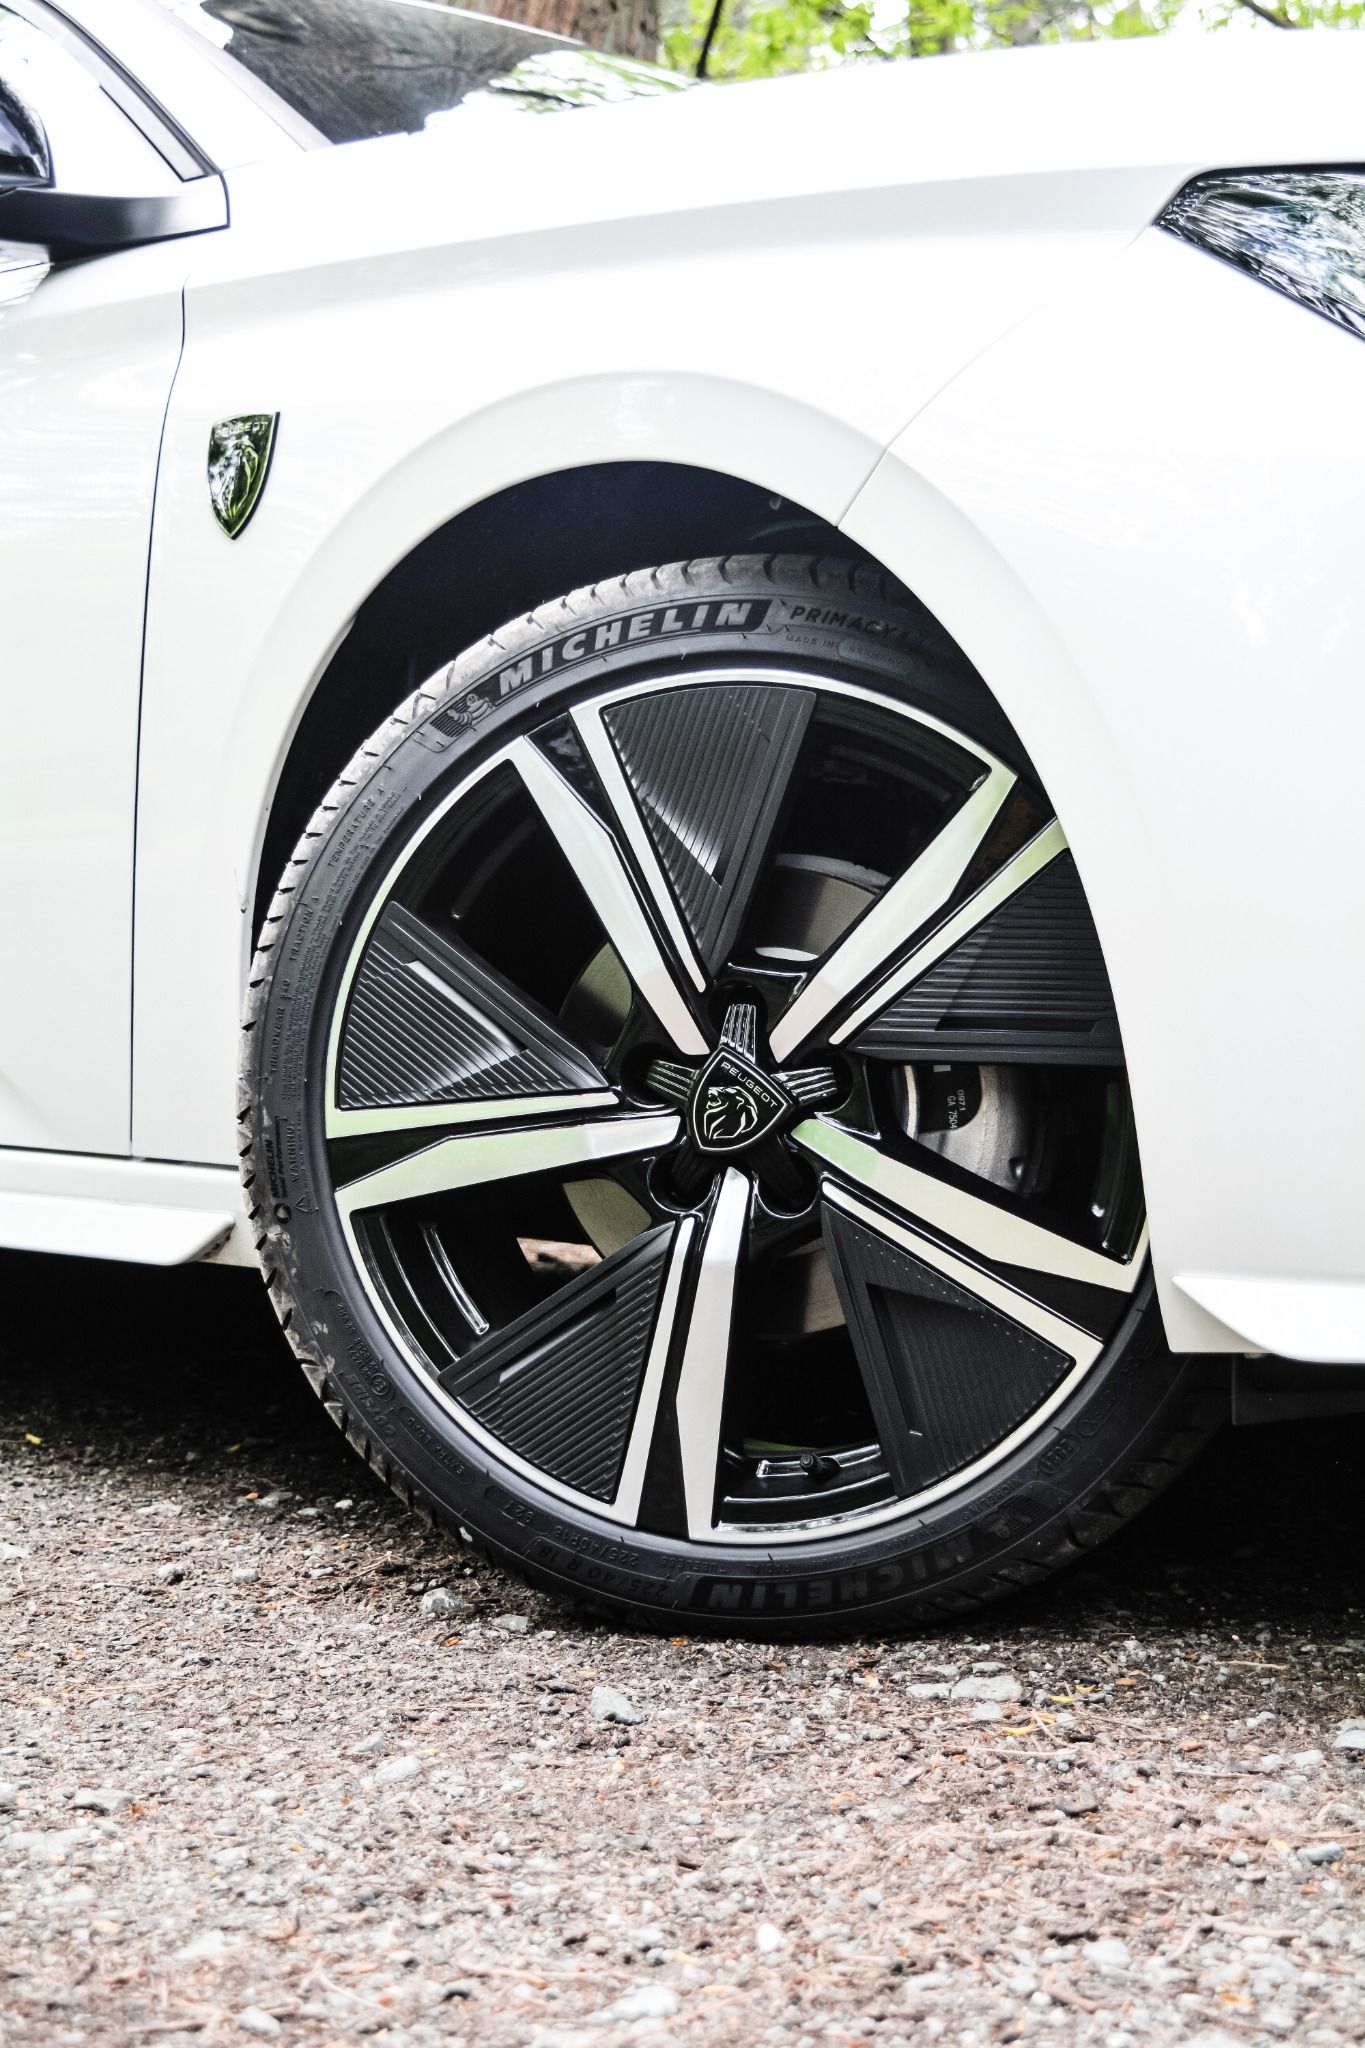 Close up of Peugeot 308 alloy wheel